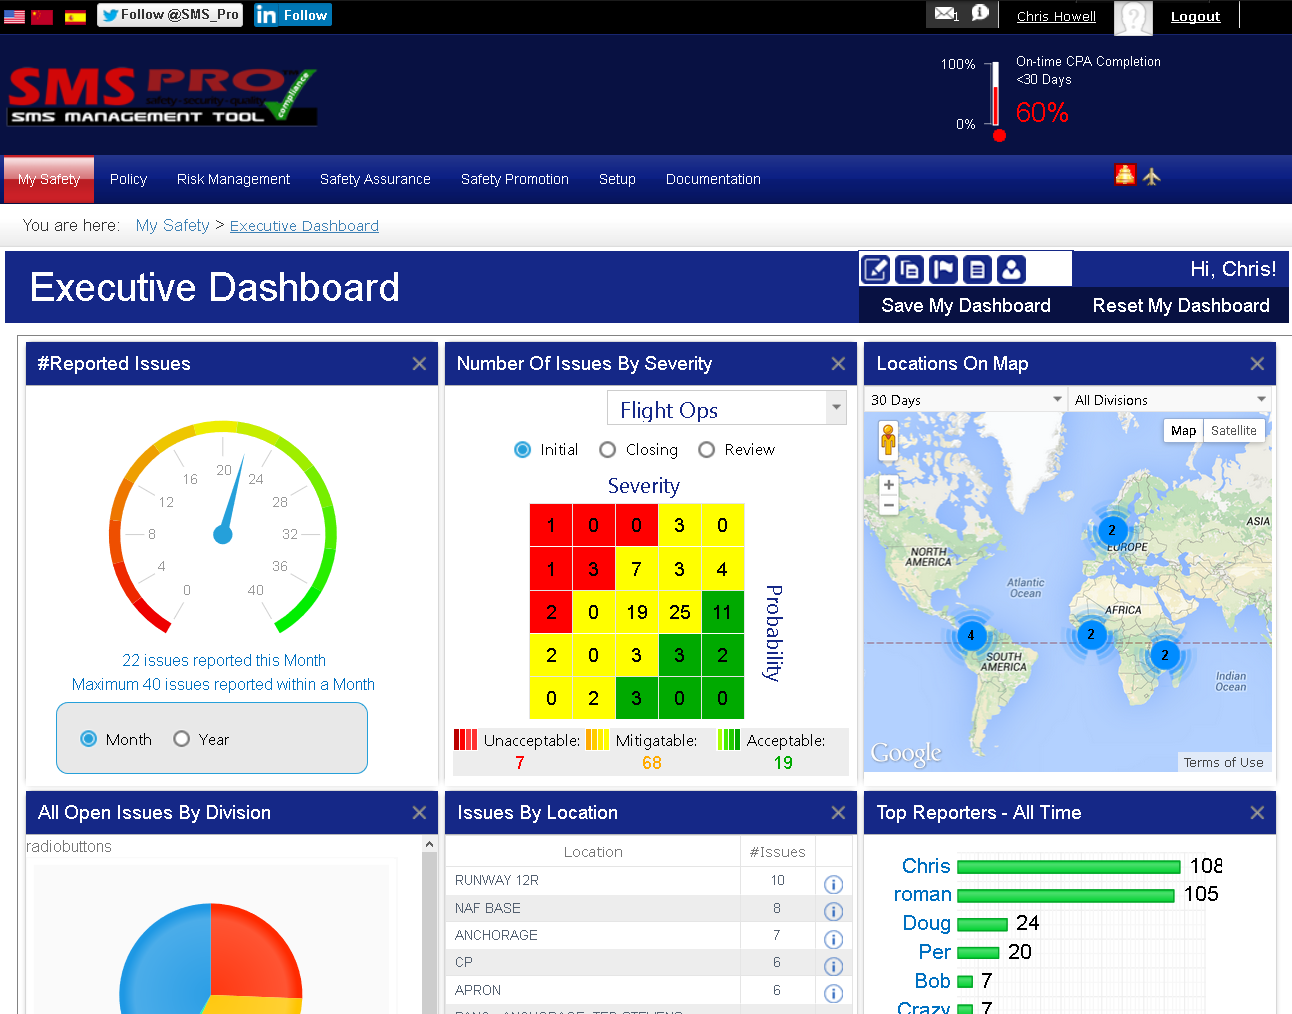 Configurable KPI Dashboards allow airline and airport managers to focus on current key performance indicators